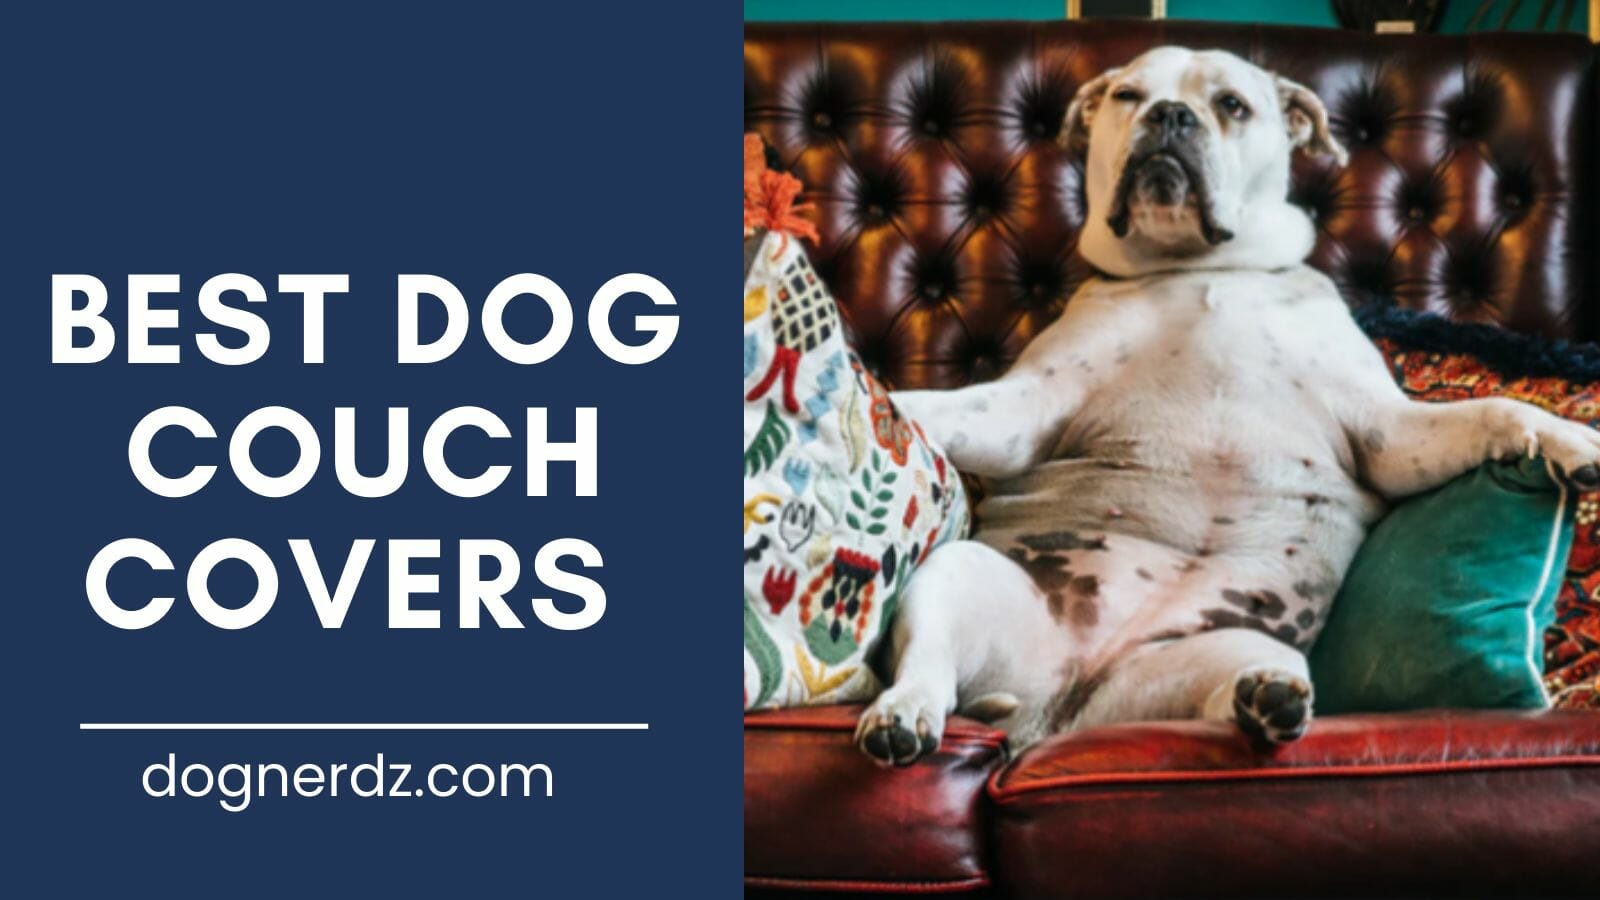 review of best dog couch covers